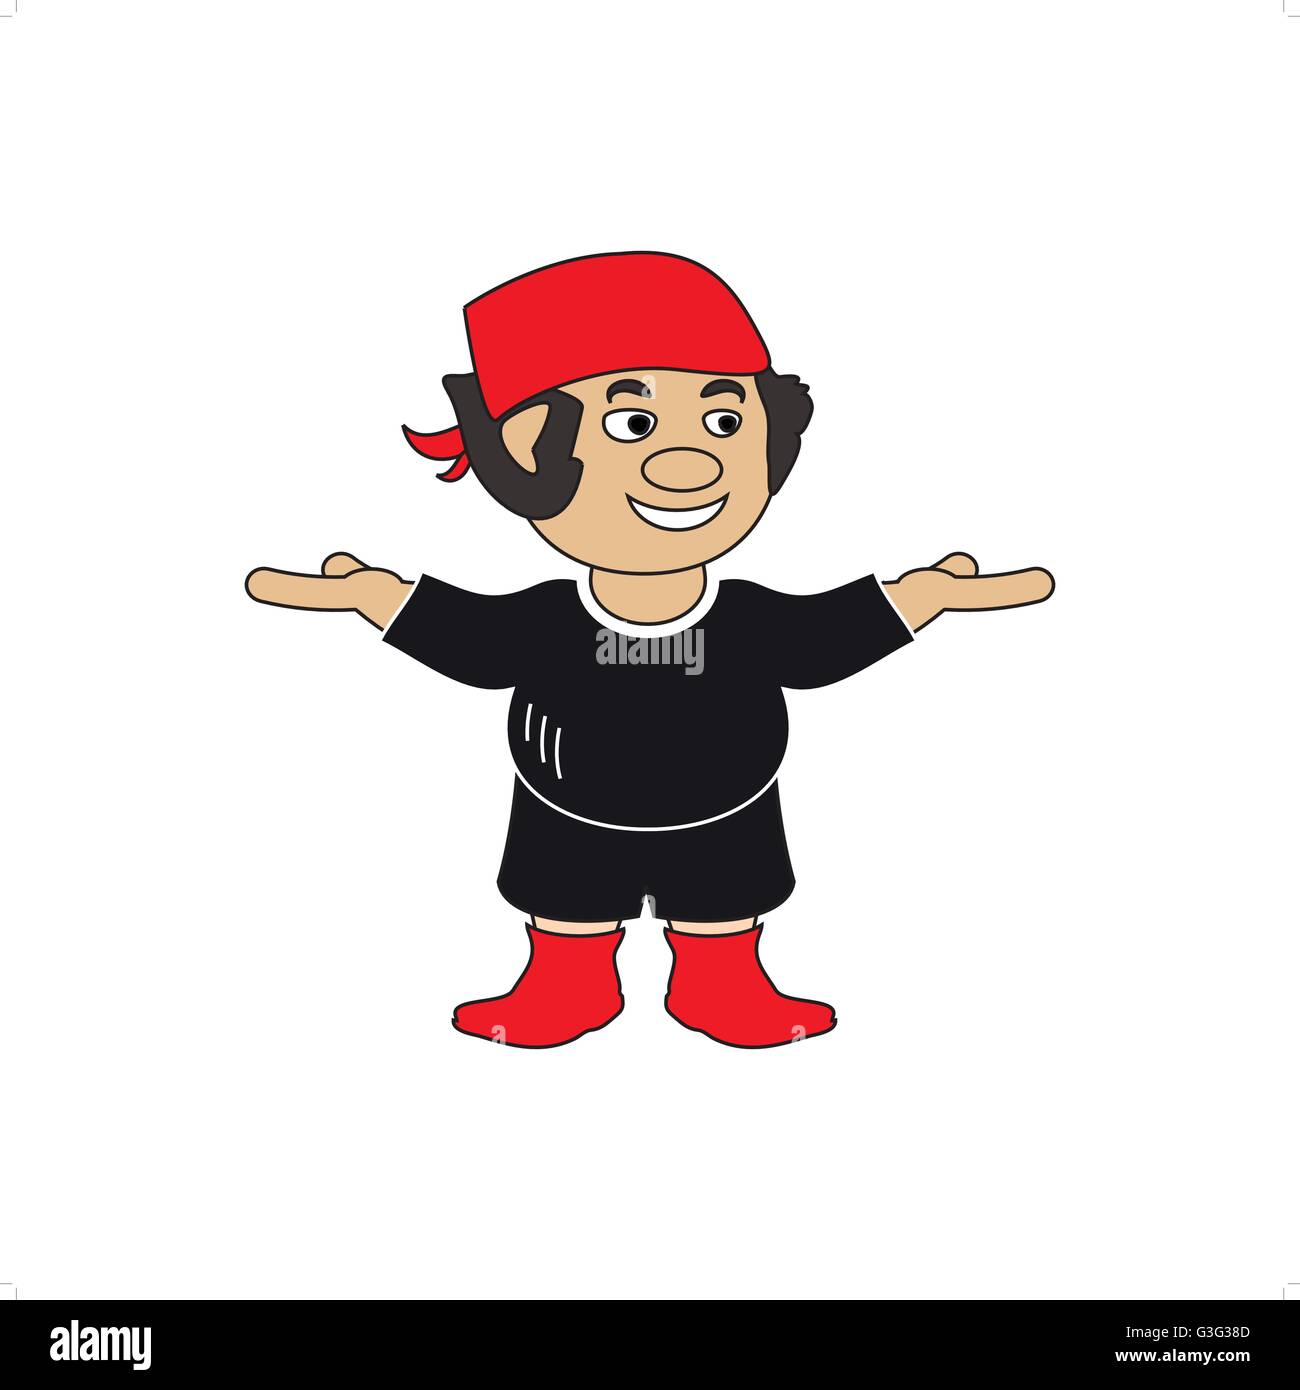 Cartoon style pirate character with red hat and boots vector illustration isolated on white backgorund. Stock Vector